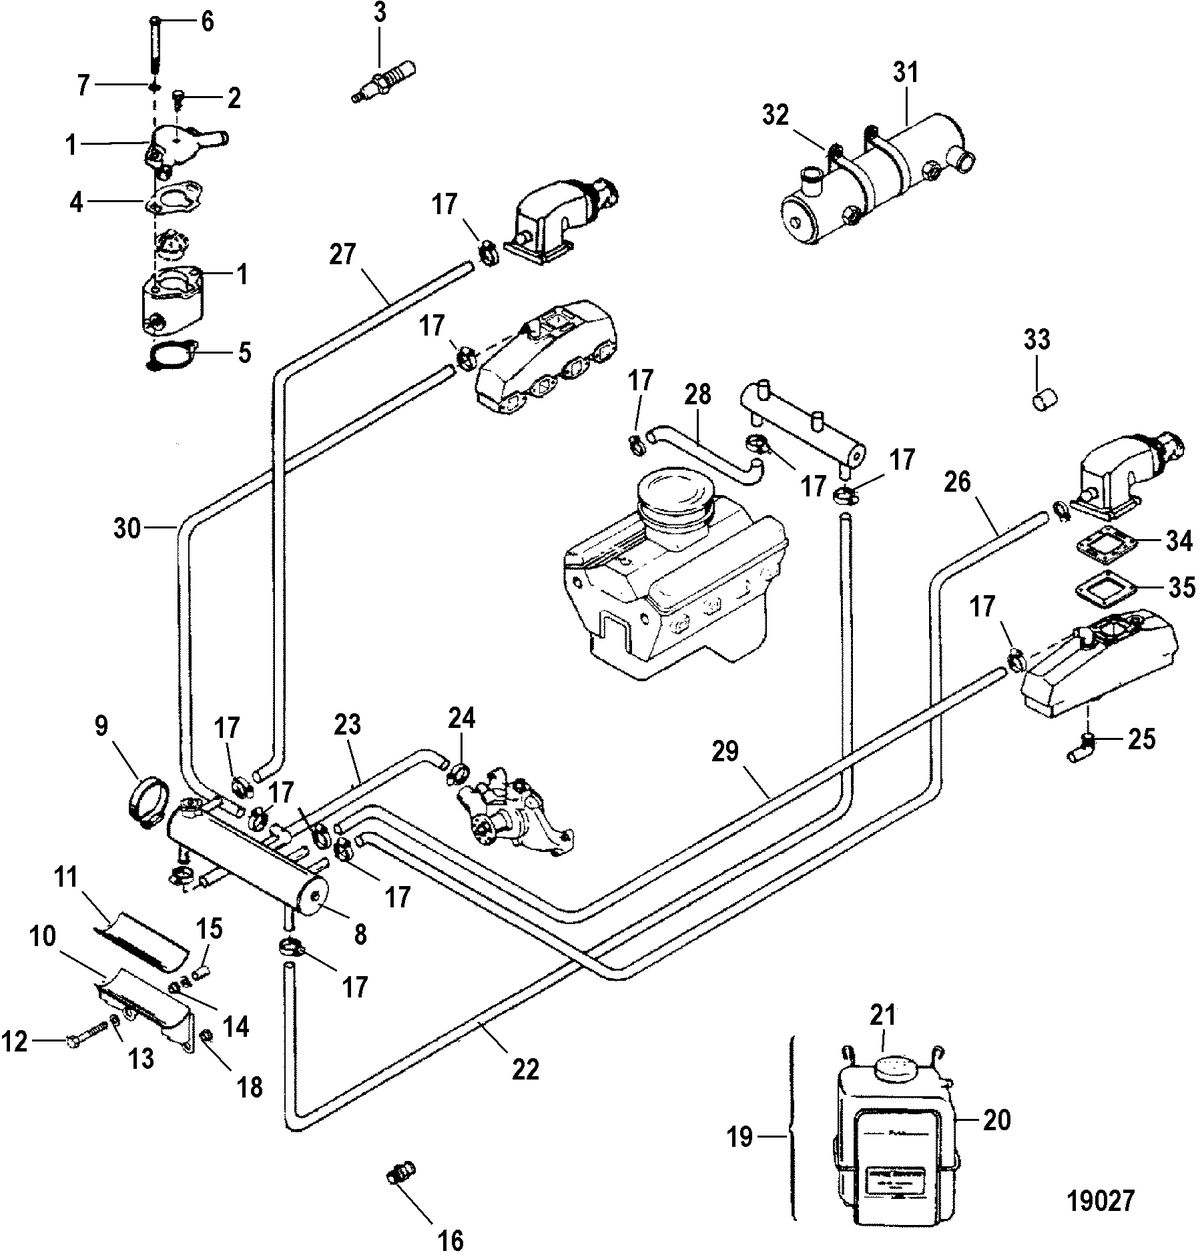 ACCESSORIES EXHAUST/COOLING SYSTEMS AND EXTENSION KITS Closed Cooling System(18390A12 / A13)